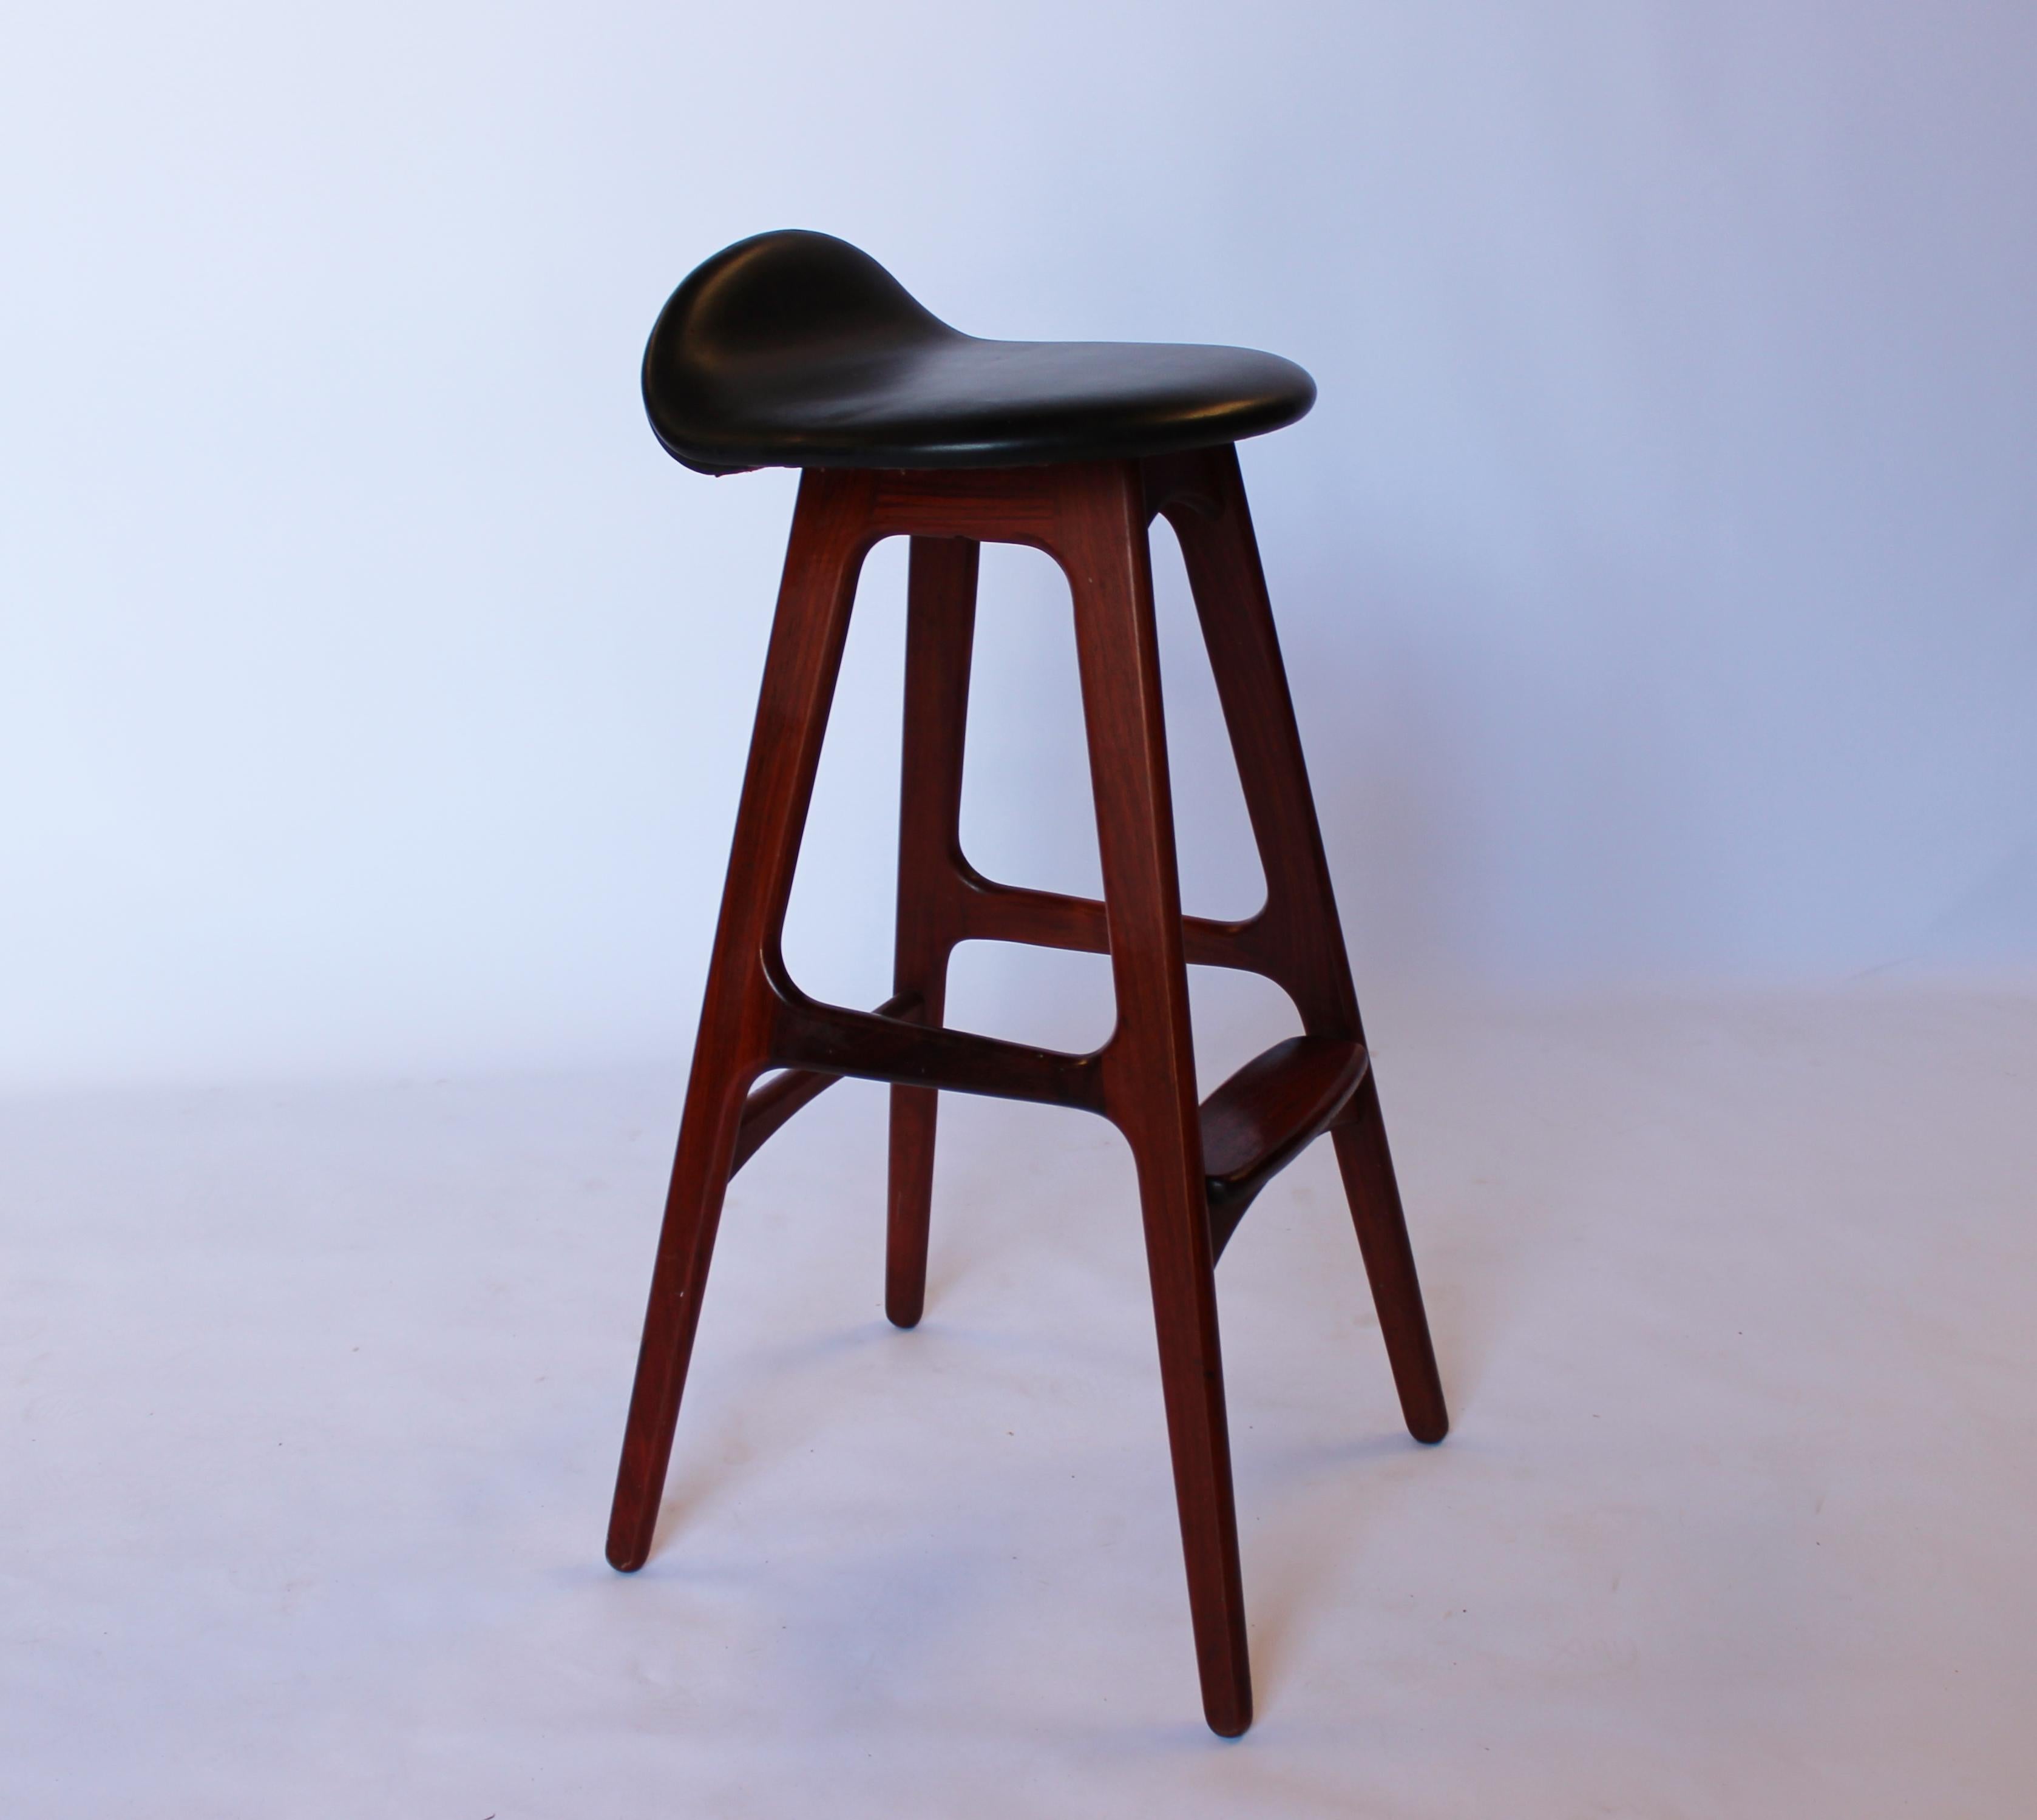 Bar stool, model OD61, designed by Erik Buch and manufactured by Odense furniture factory. The stool are of rosewood and black leather seat. The stool is in great vintage condition.